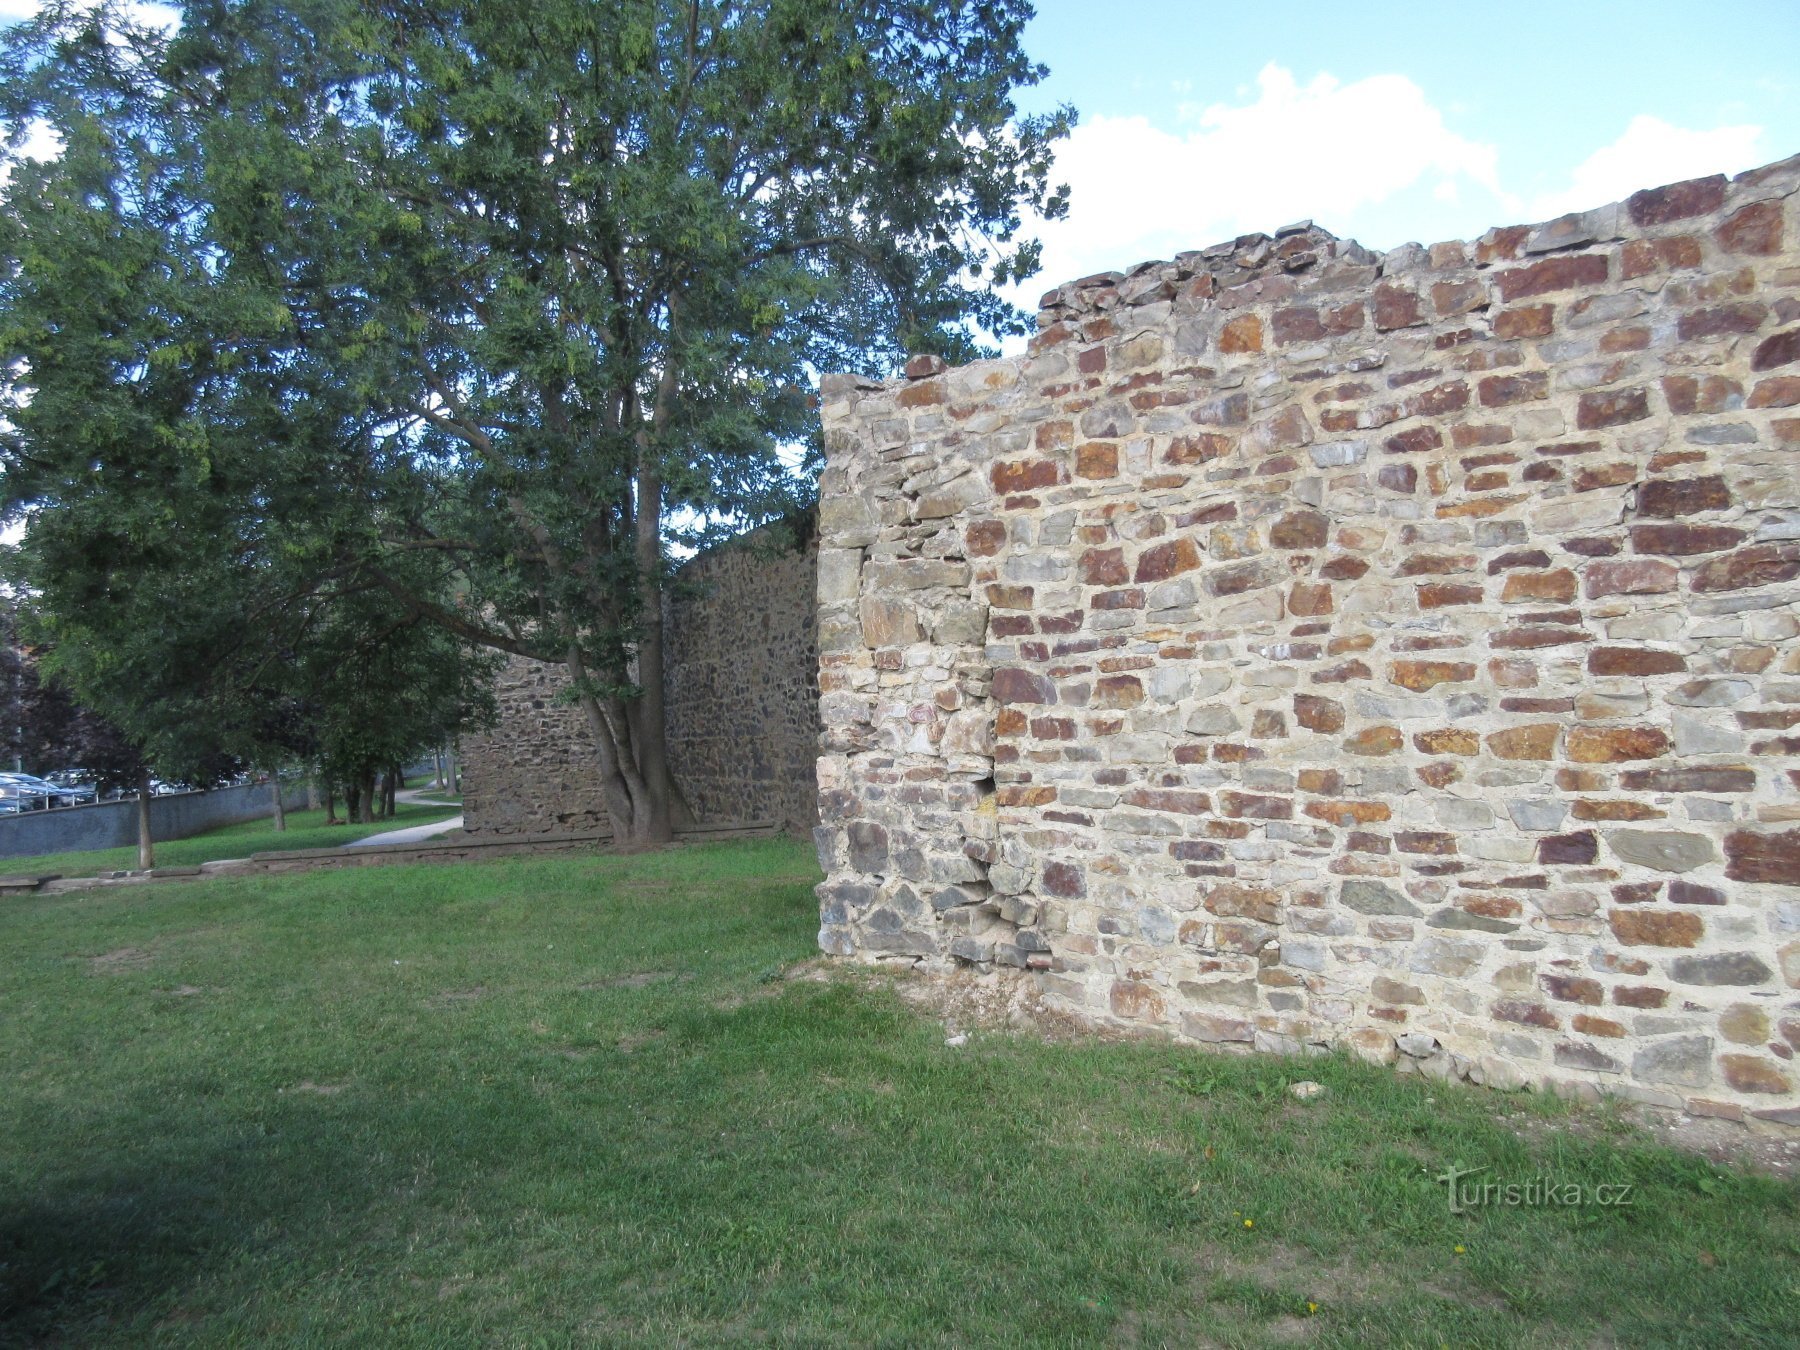 At Příkopě - the remains of the walls